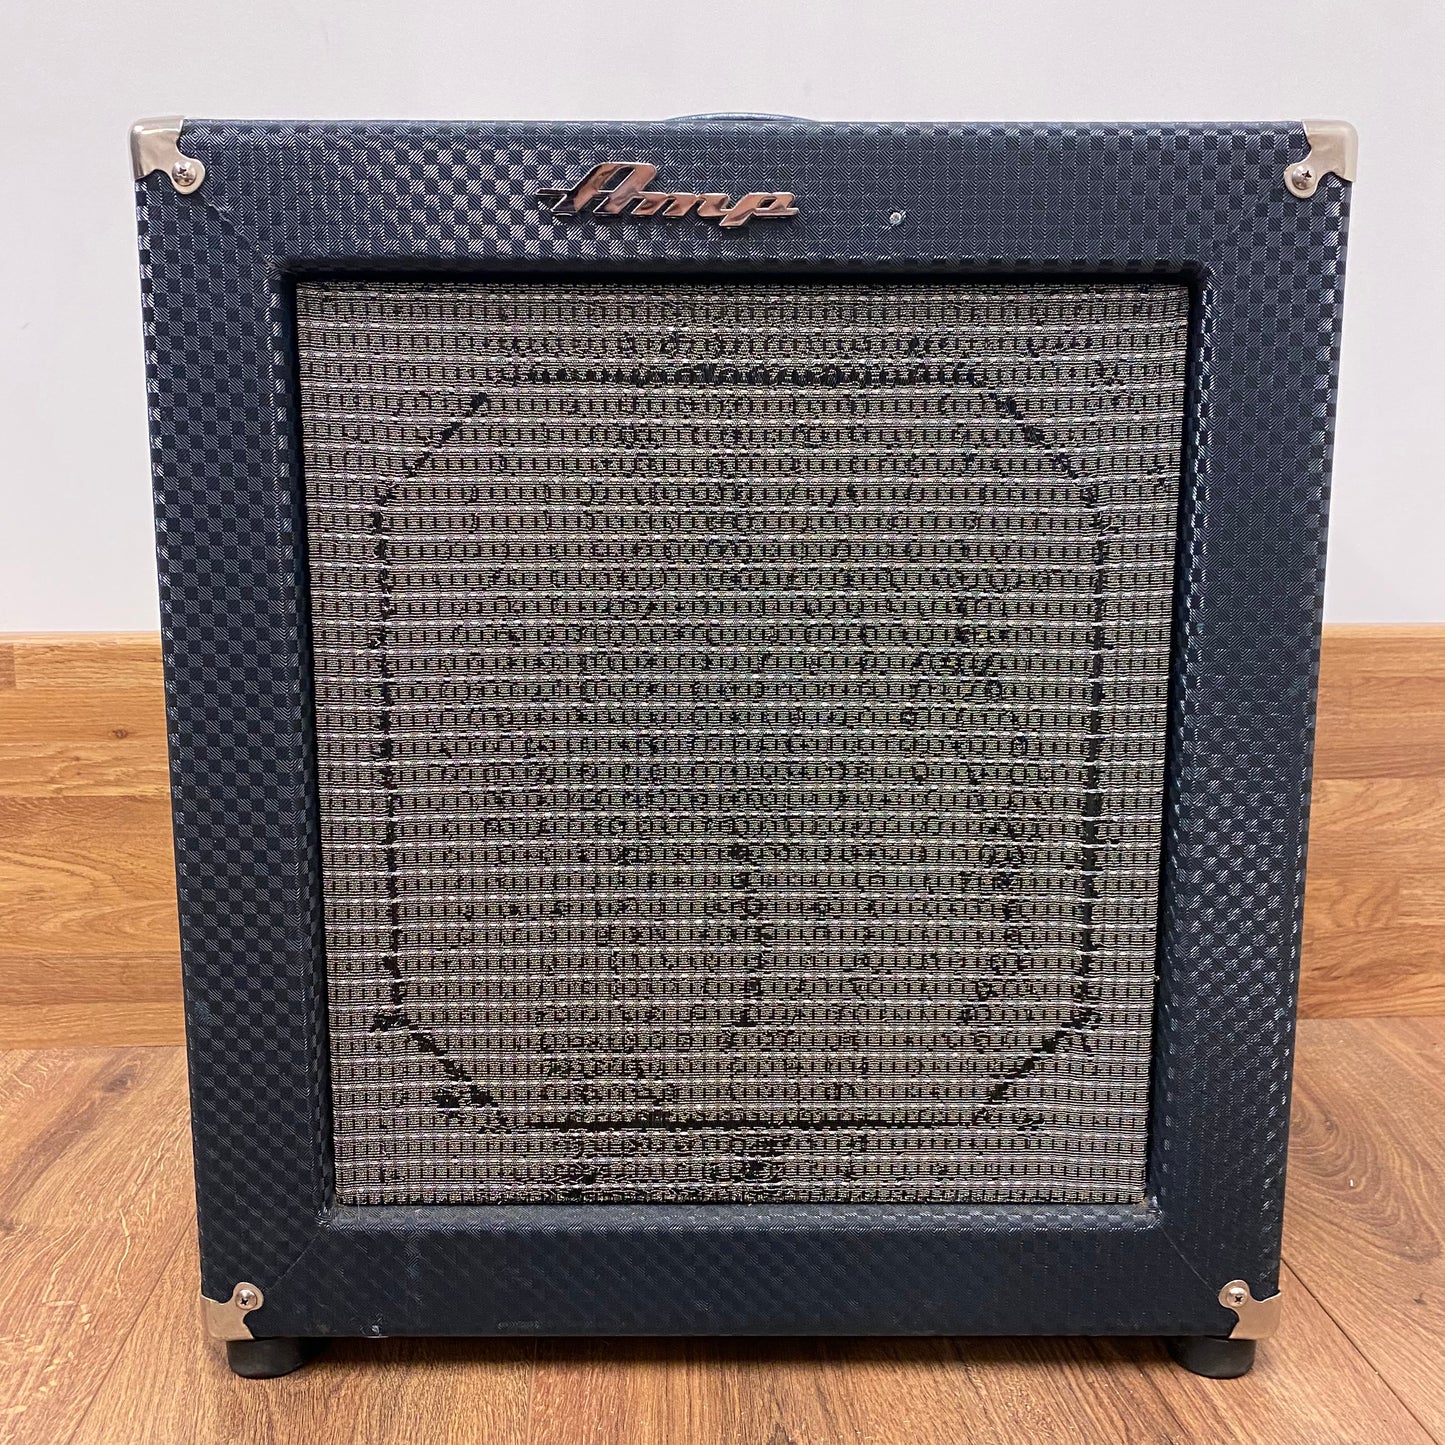 Pre-Owned Ampeg B100R 100w 1x15" Bass Combo - Made in USA